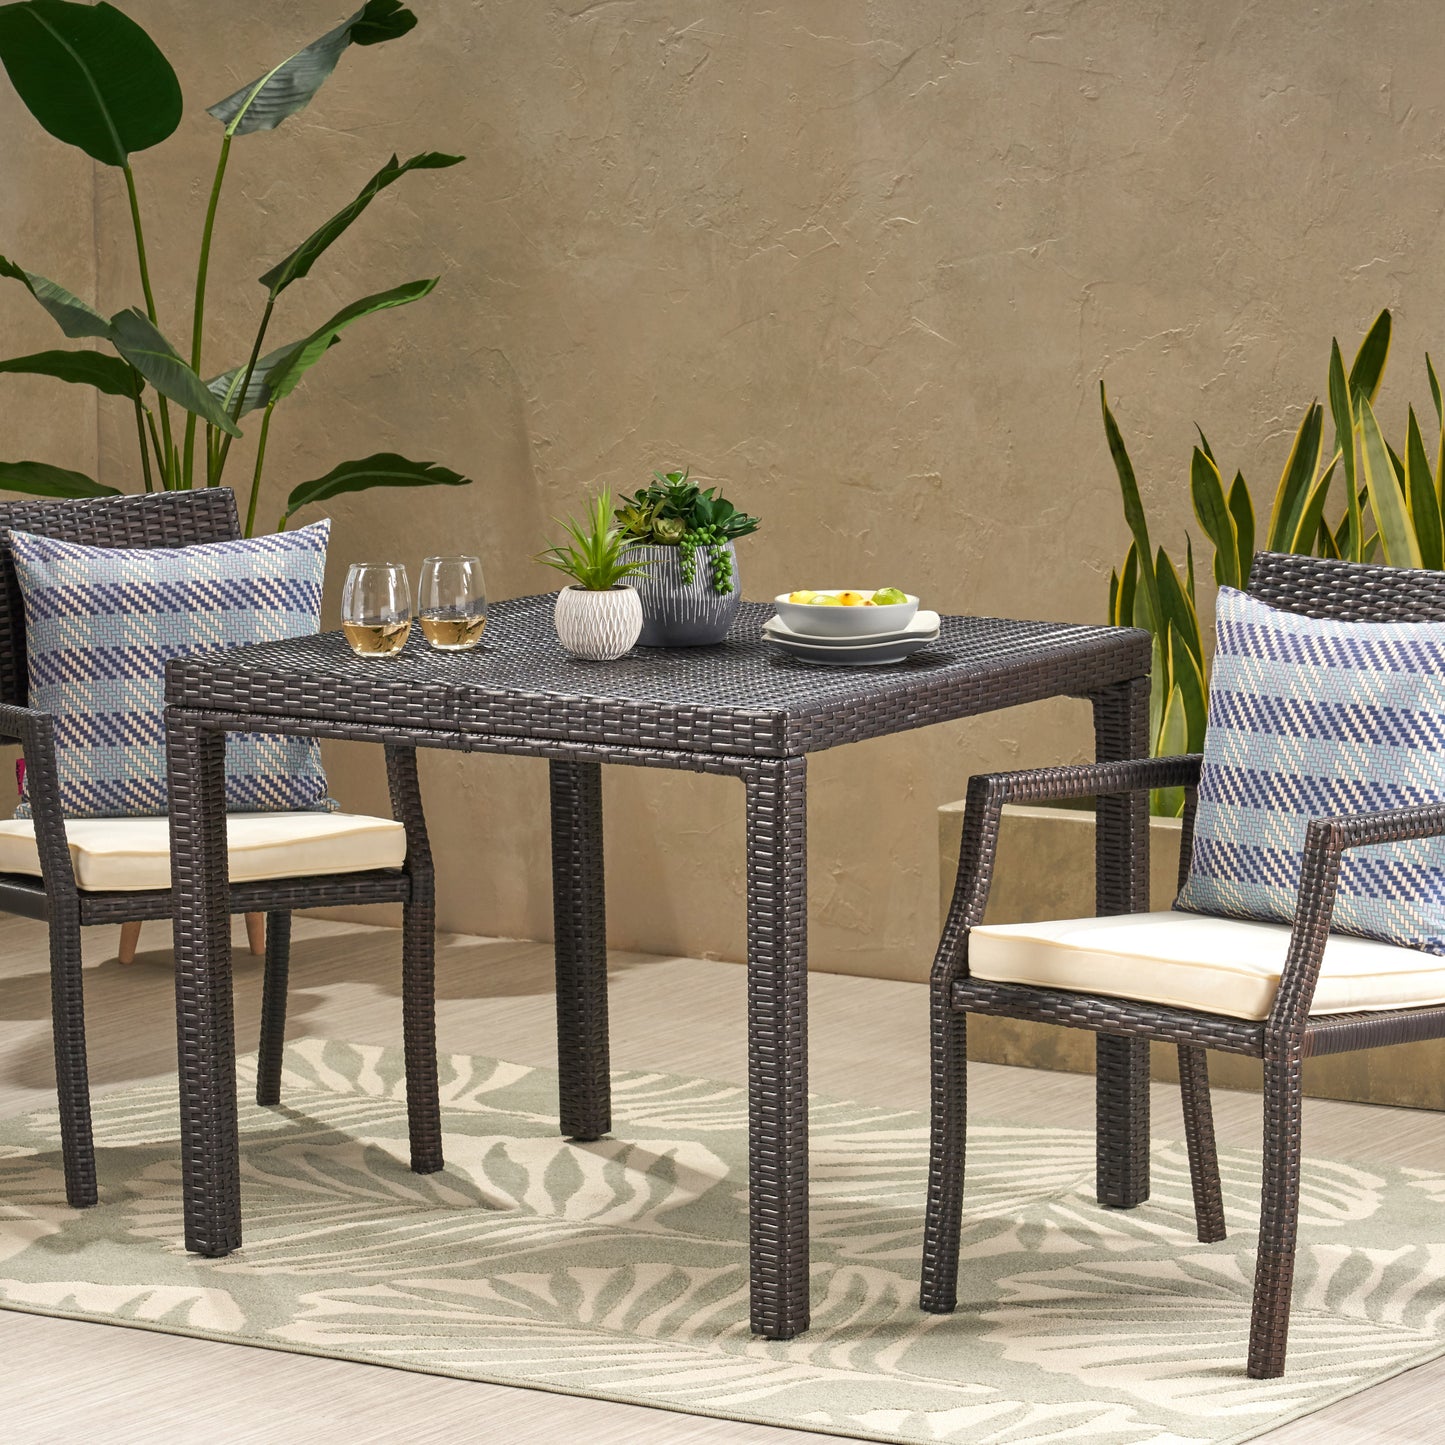 Edene Outdoor Multibrown Wicker Square Dining Table